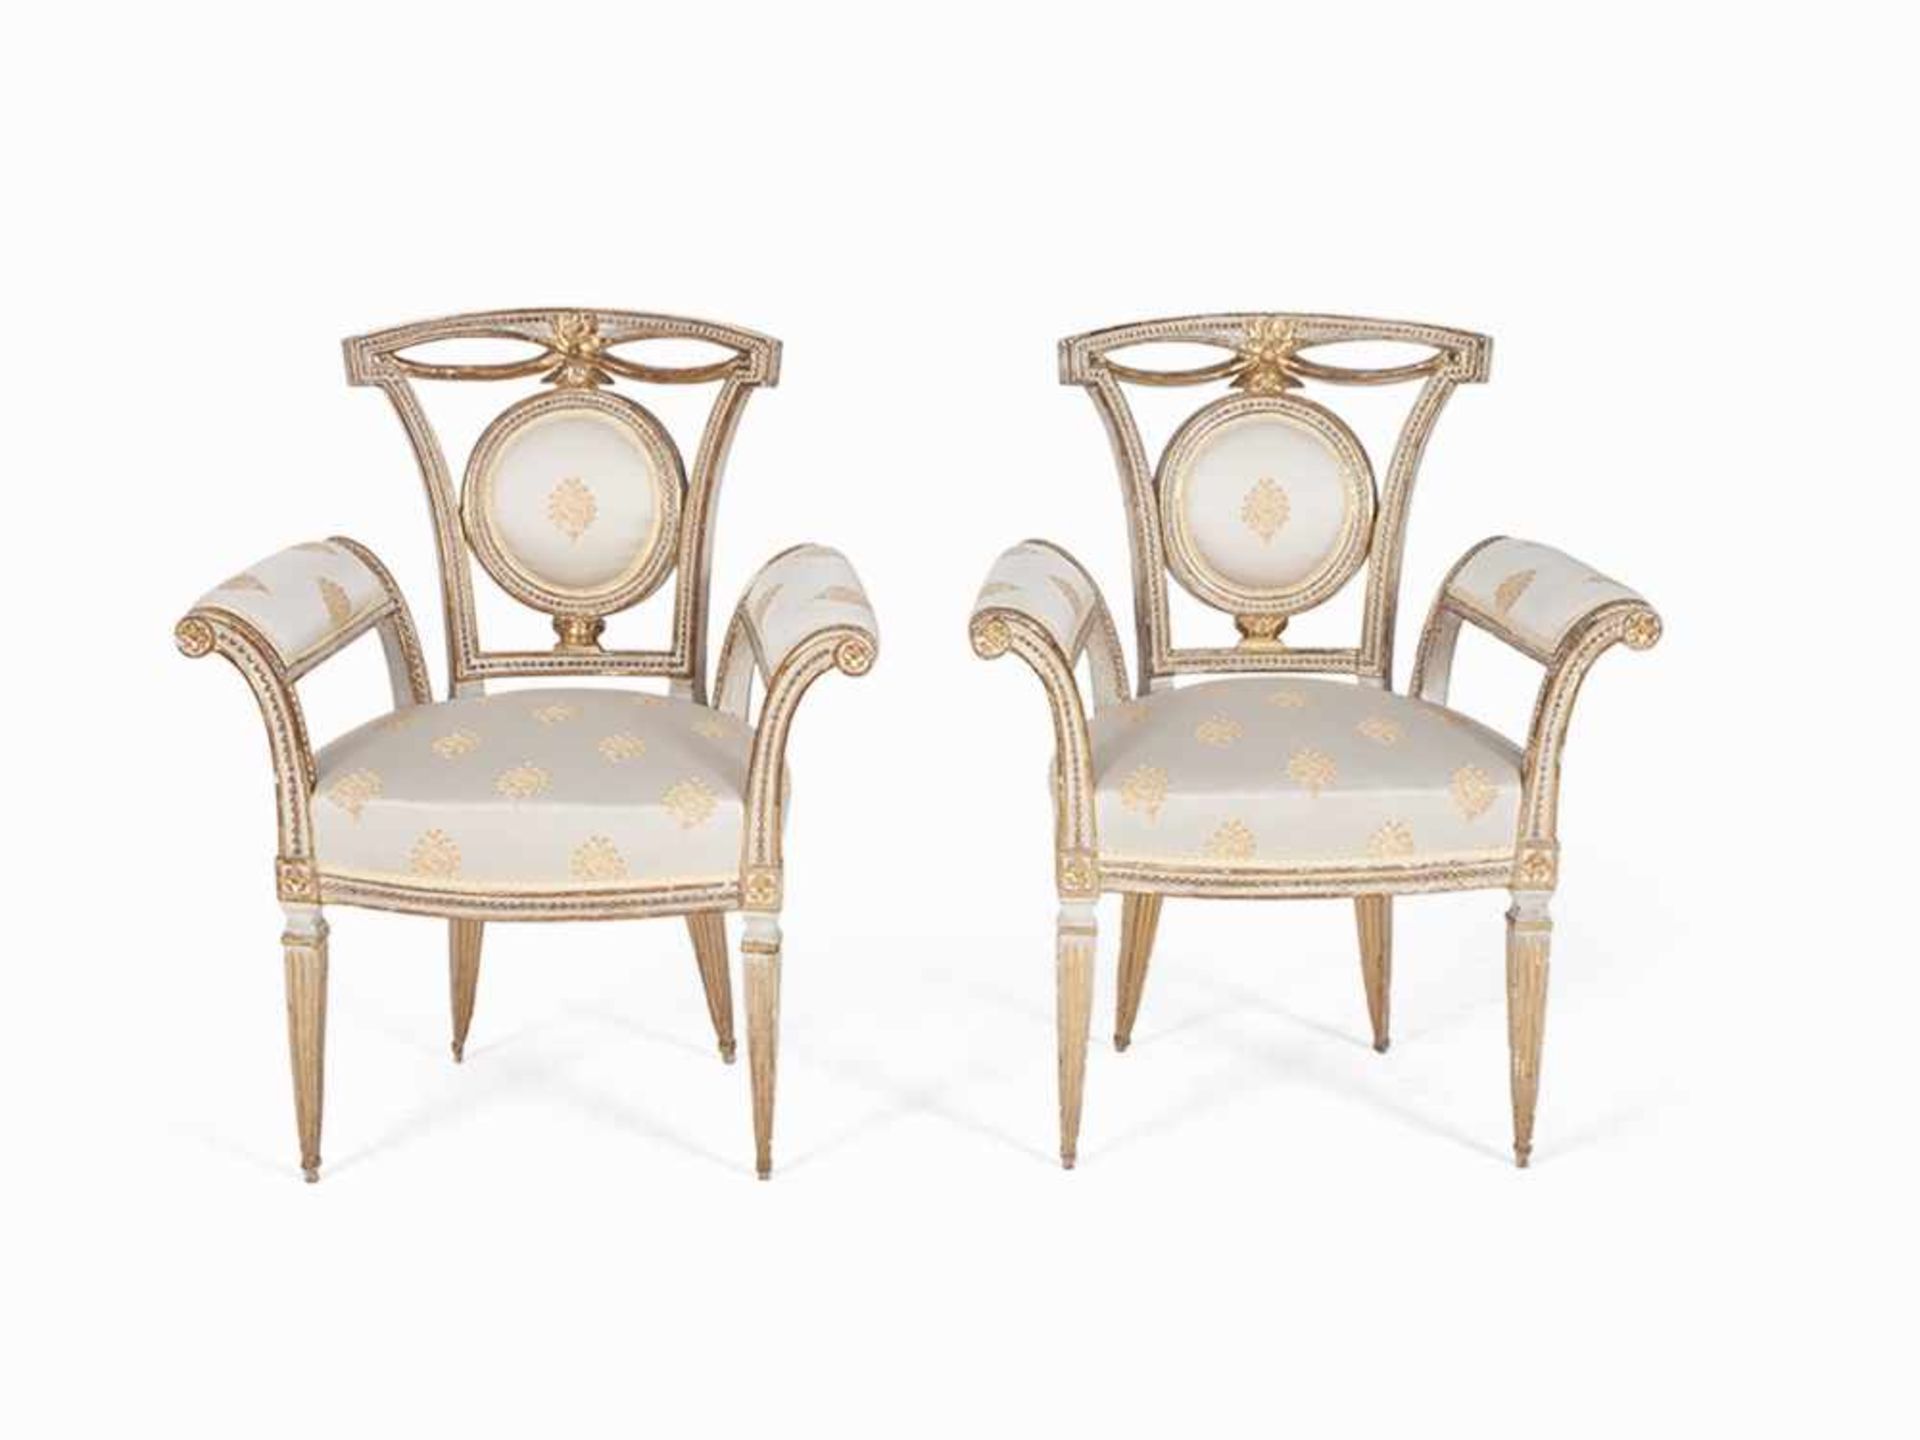 Pair of Armchairs, Lucca, around 1790 Solid wood, carved, white painted and partial gold-plated,